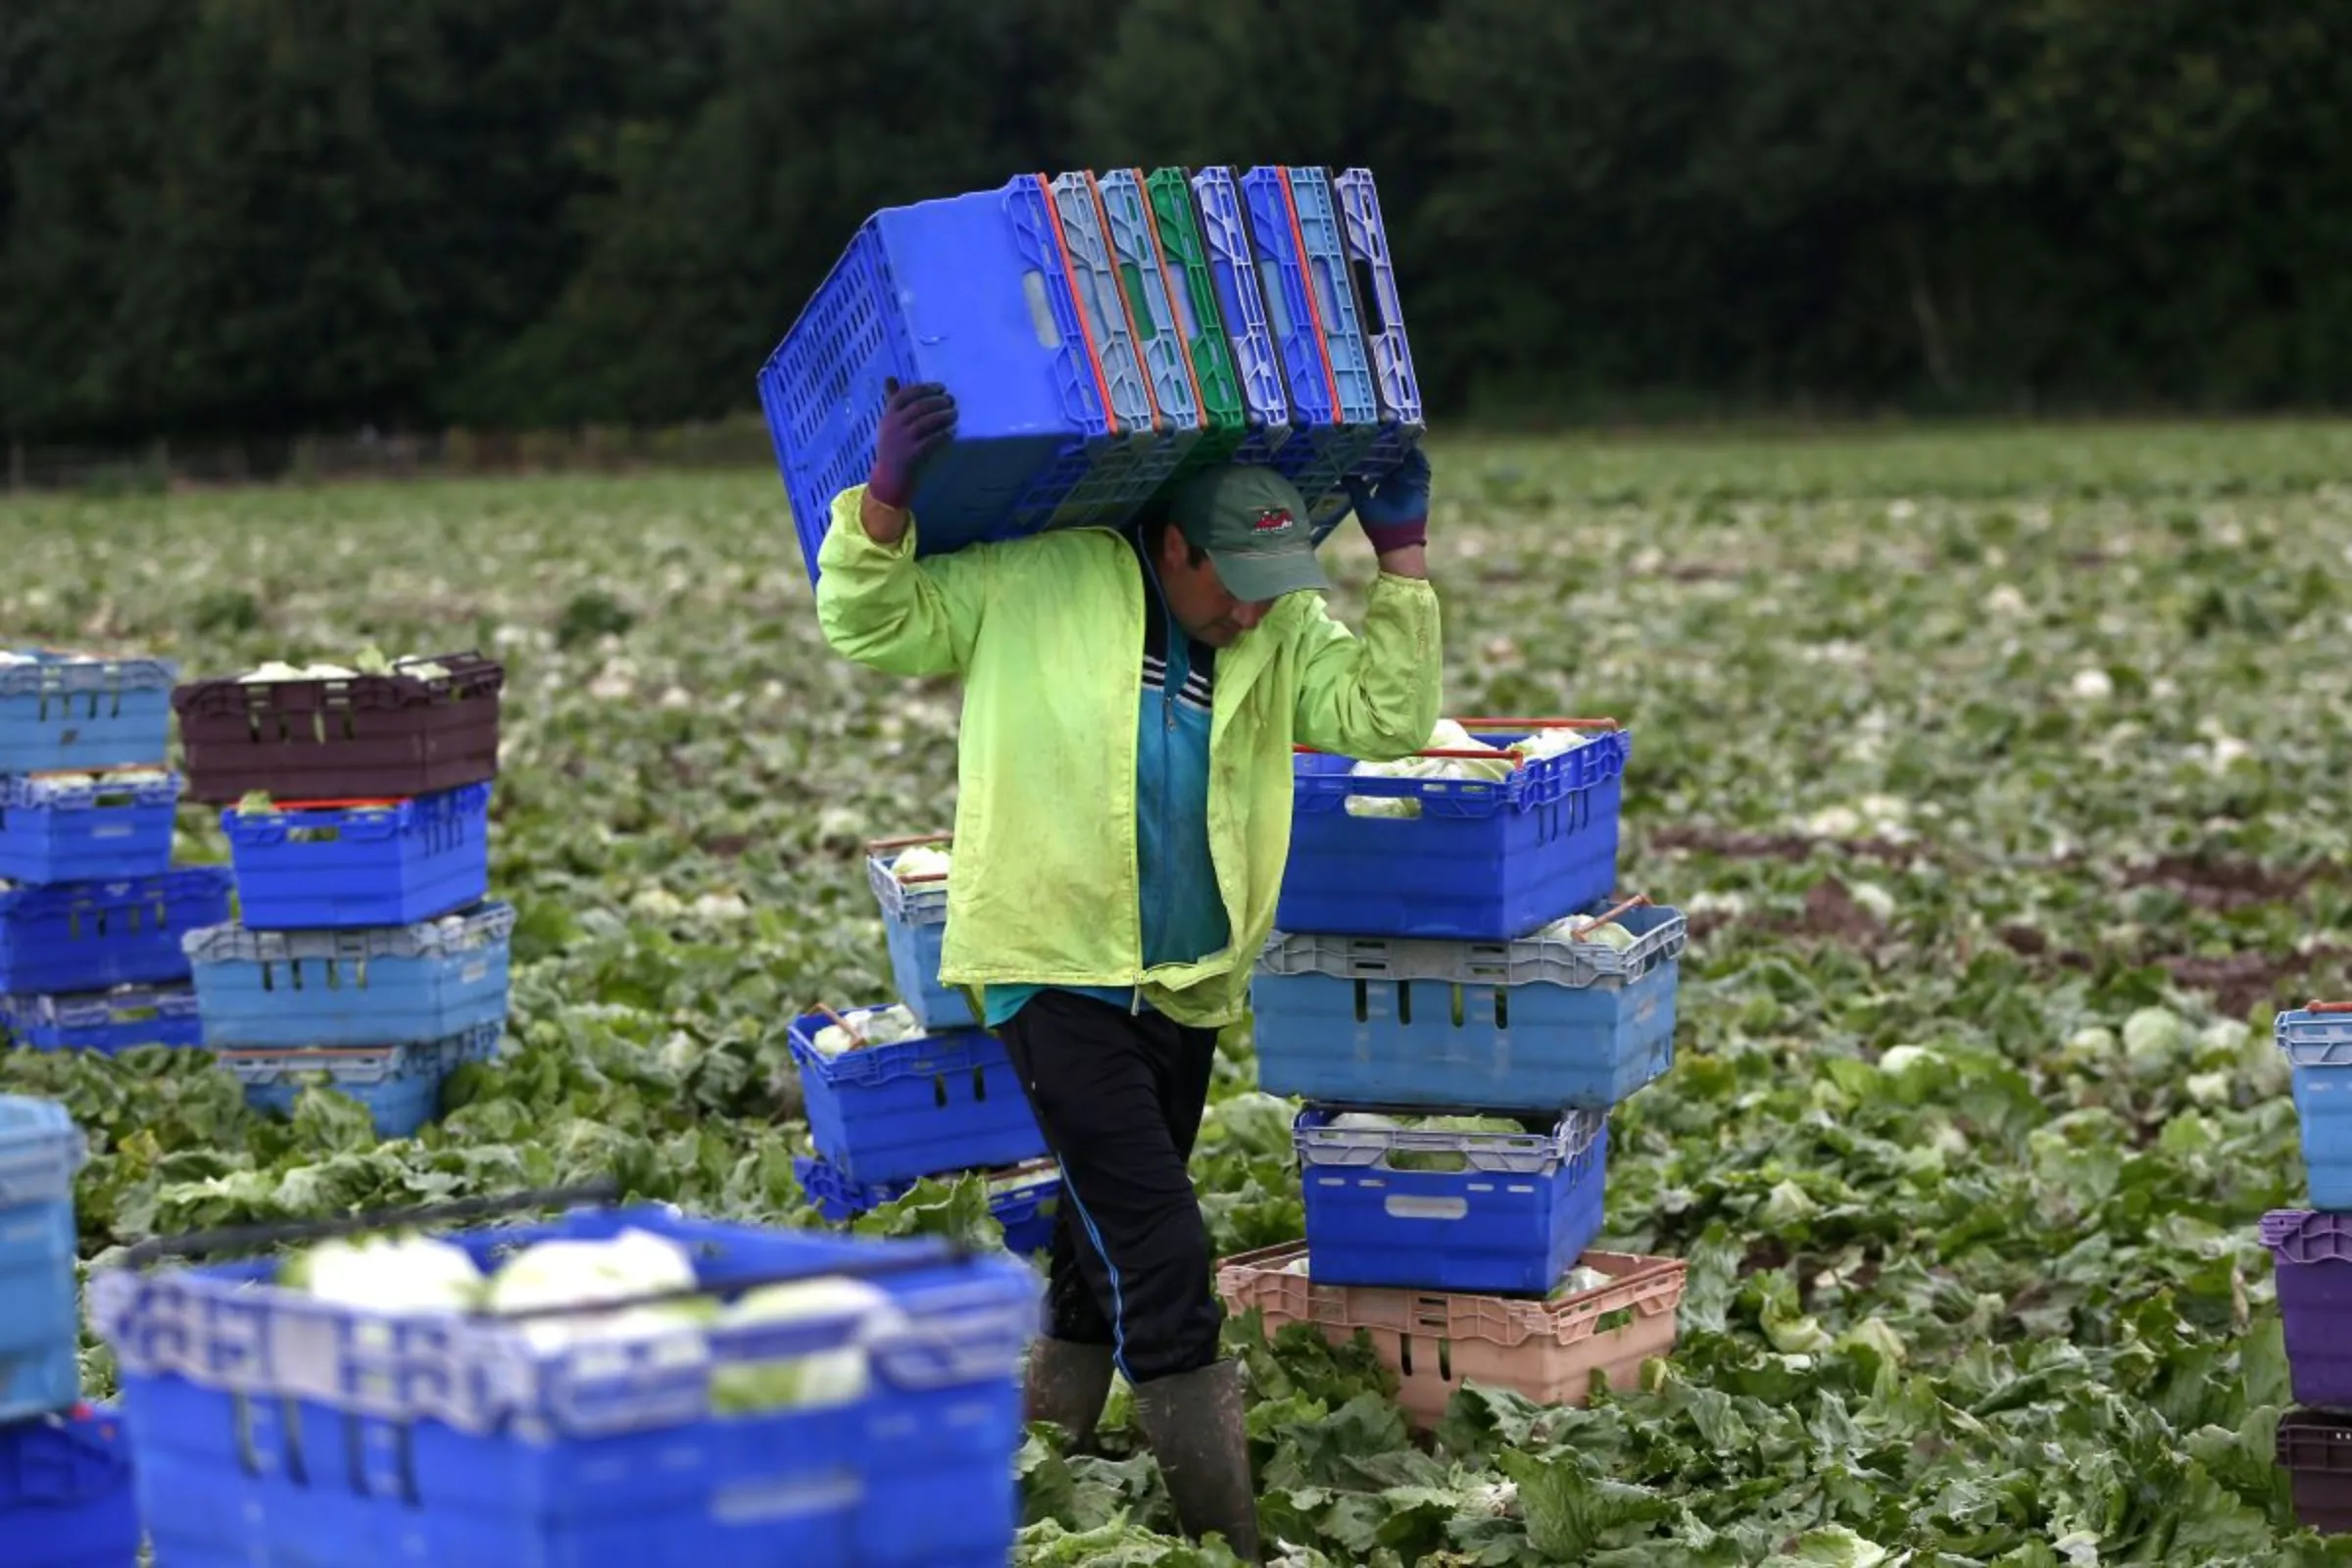 A migrant worker carries boxes at a farm in Kent, Britain July 24, 2017